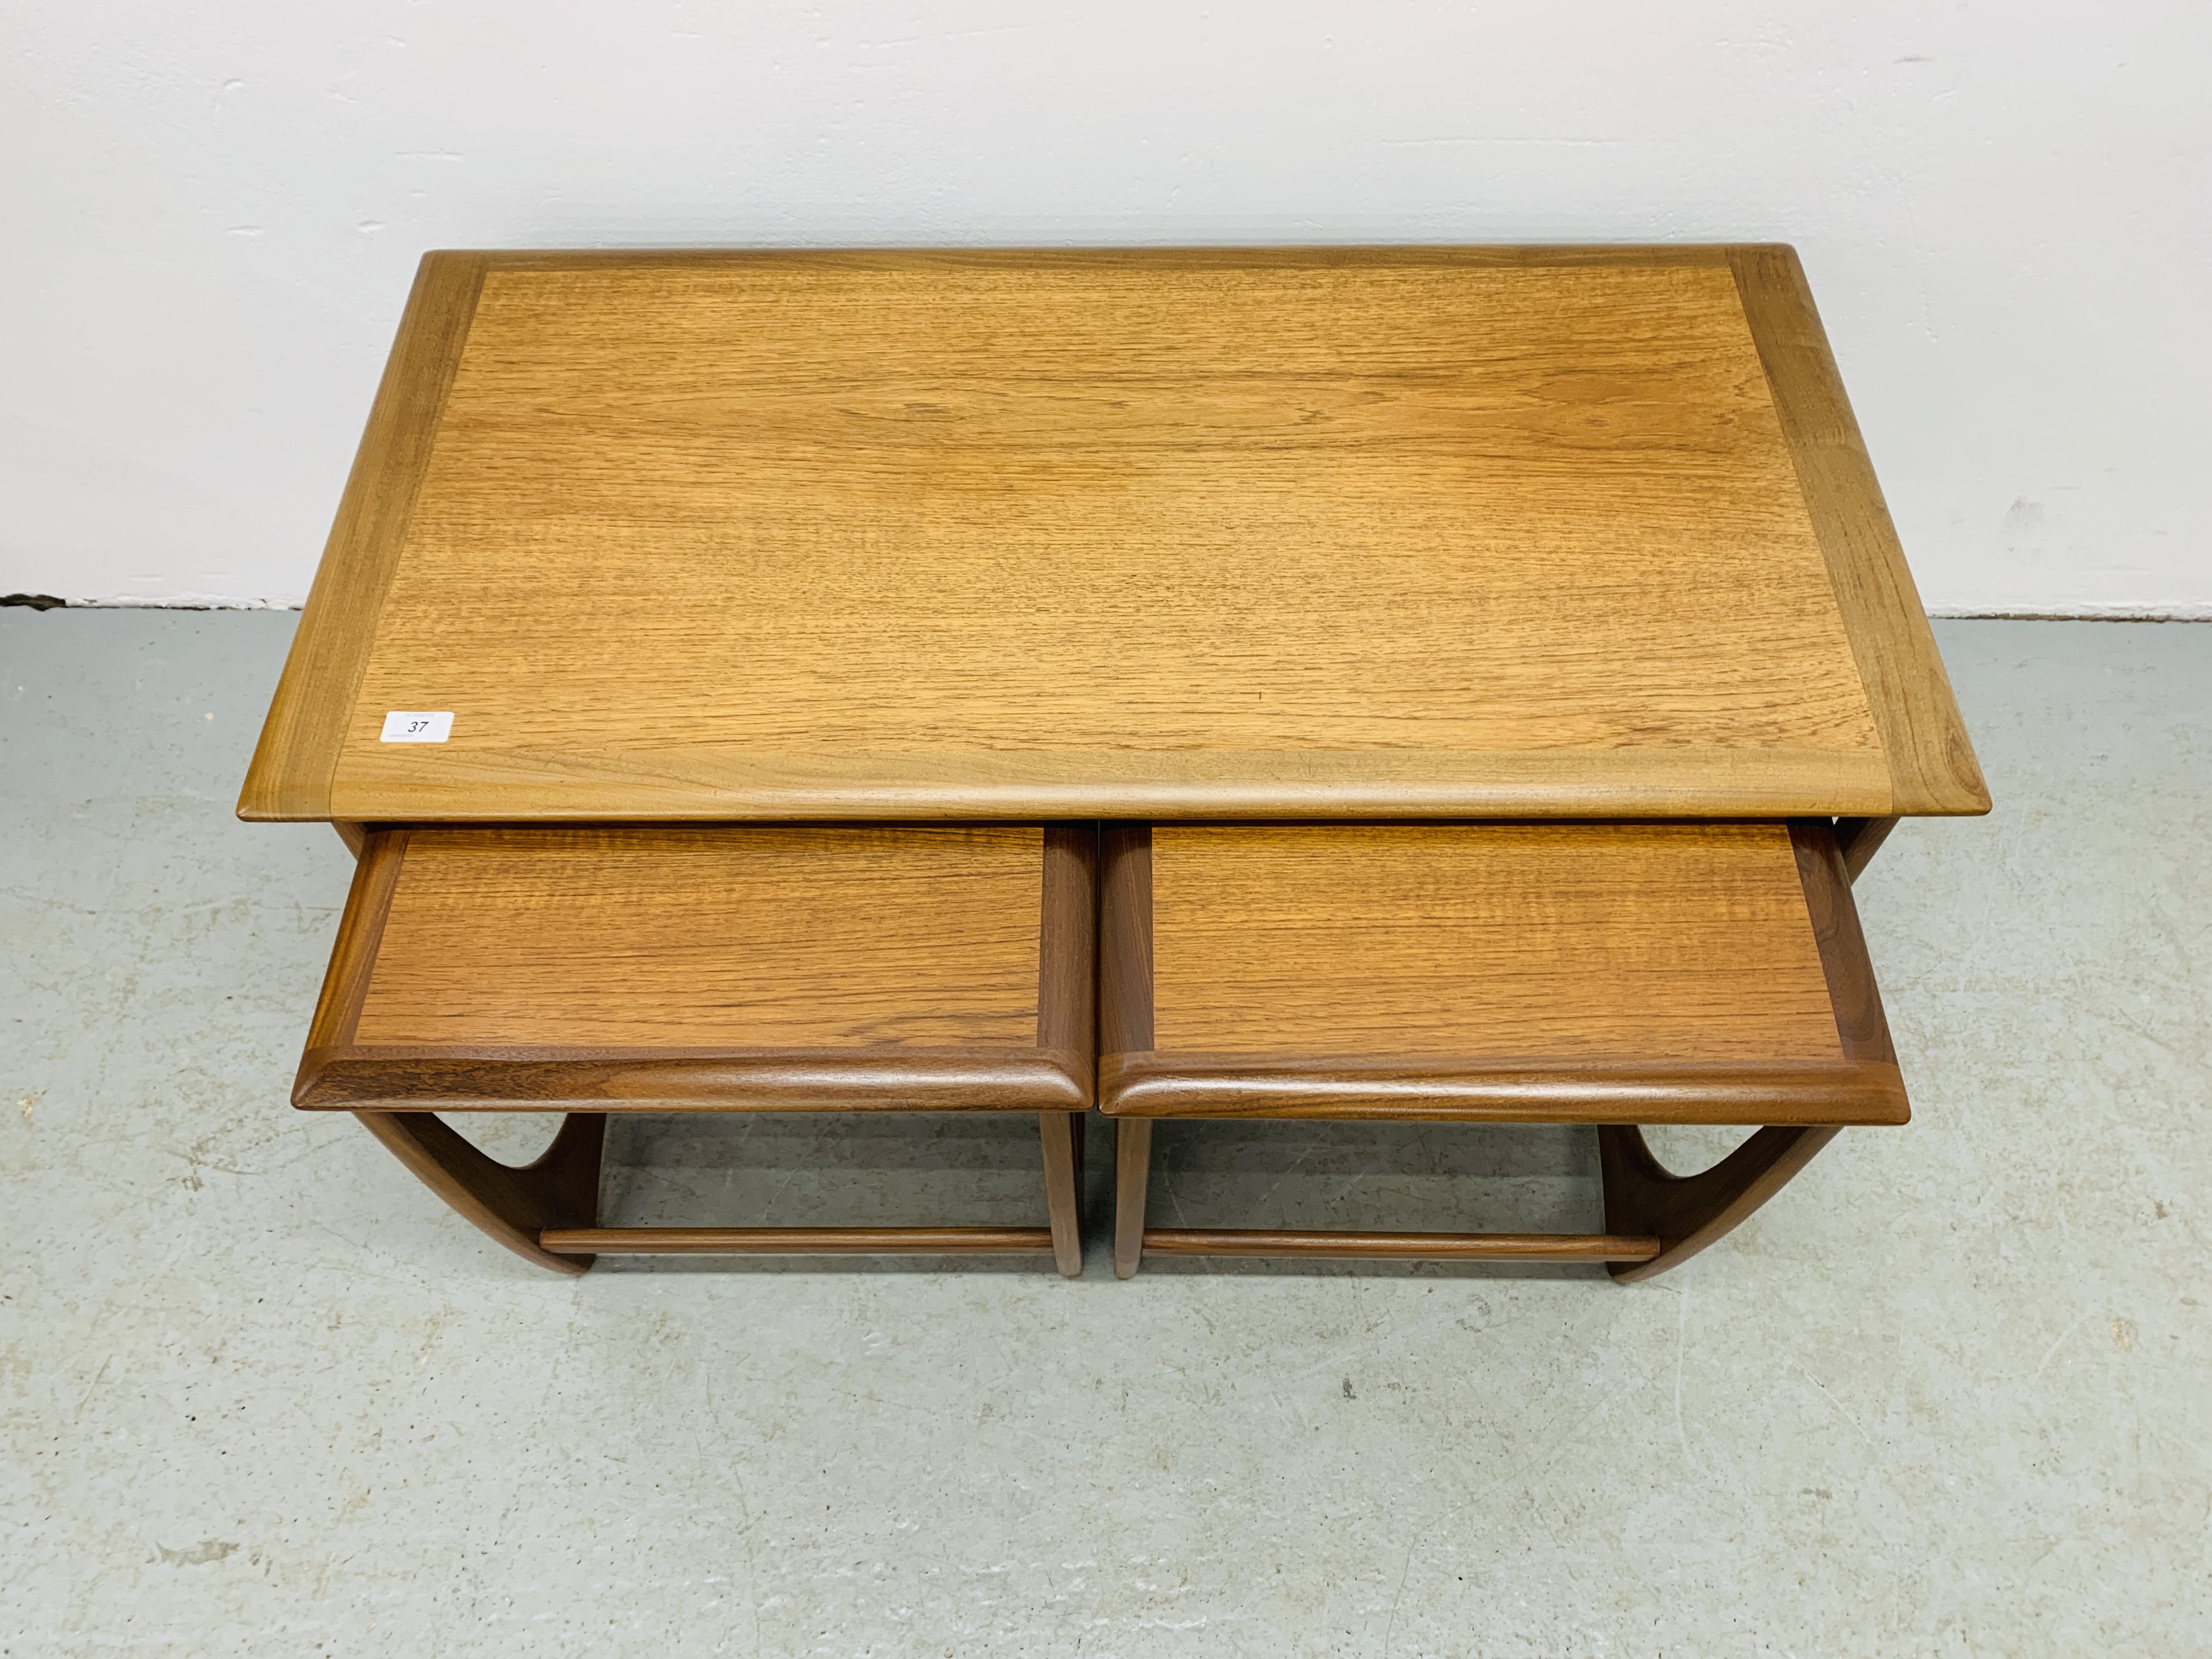 G-PLAN TEAK RECTANGULAR COFFEE TABLE WITH TWO NESTING TABLES BELOW - Image 2 of 12